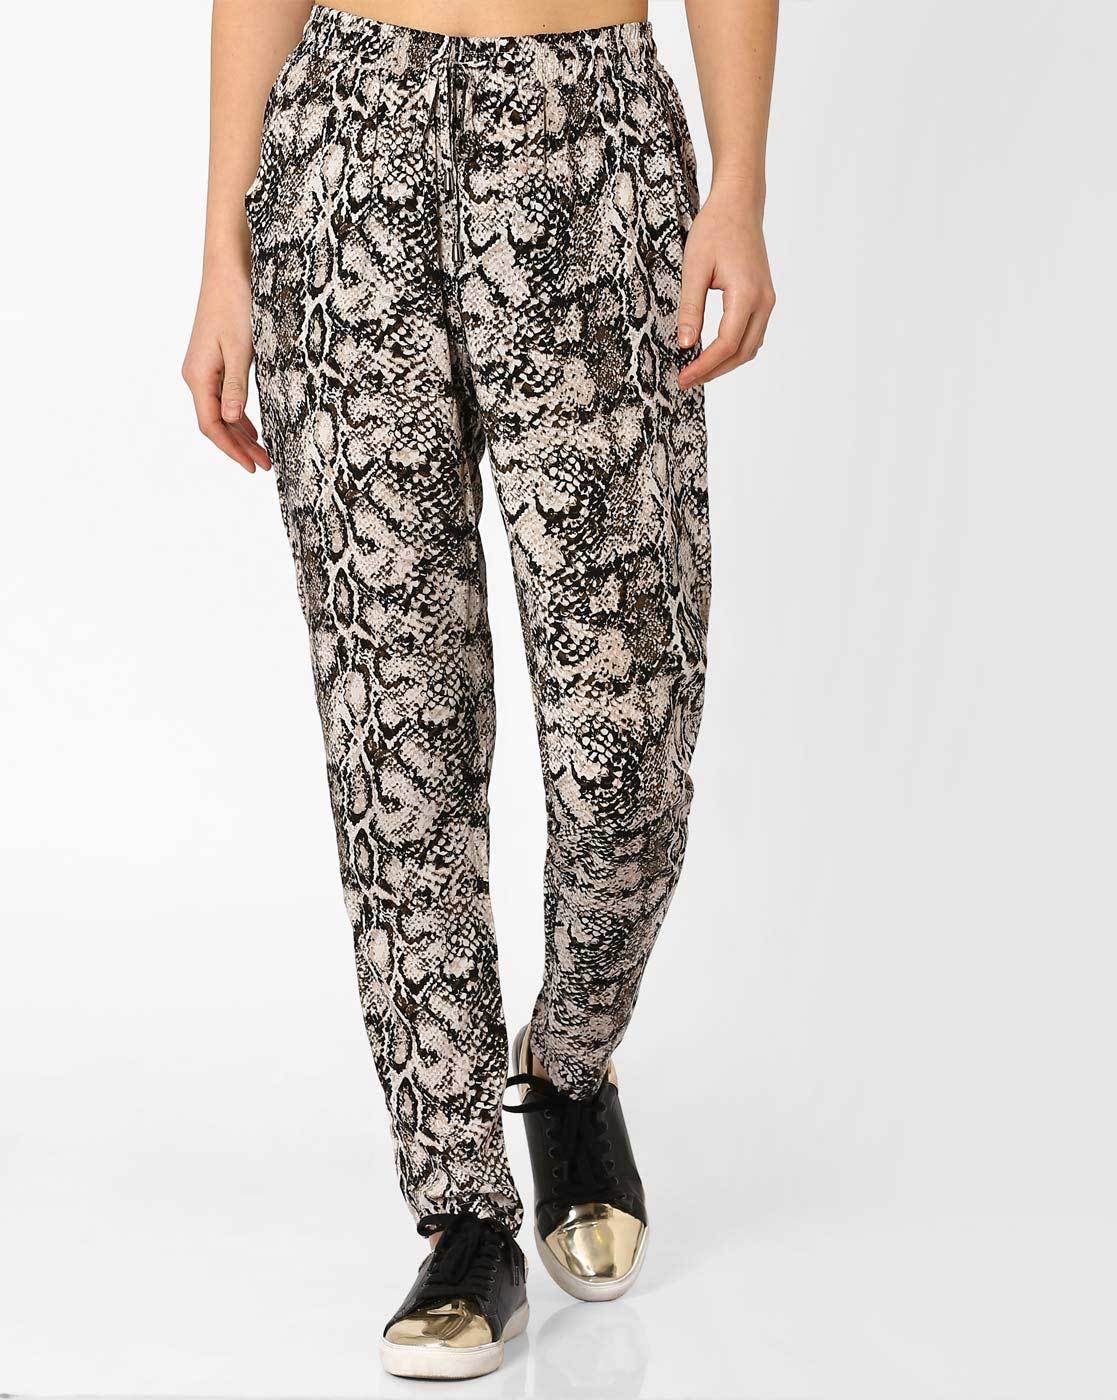 NEW Honey Punch Confidence Queen Snake Print Pants | Snake print pants, Snake  print, Honey punch